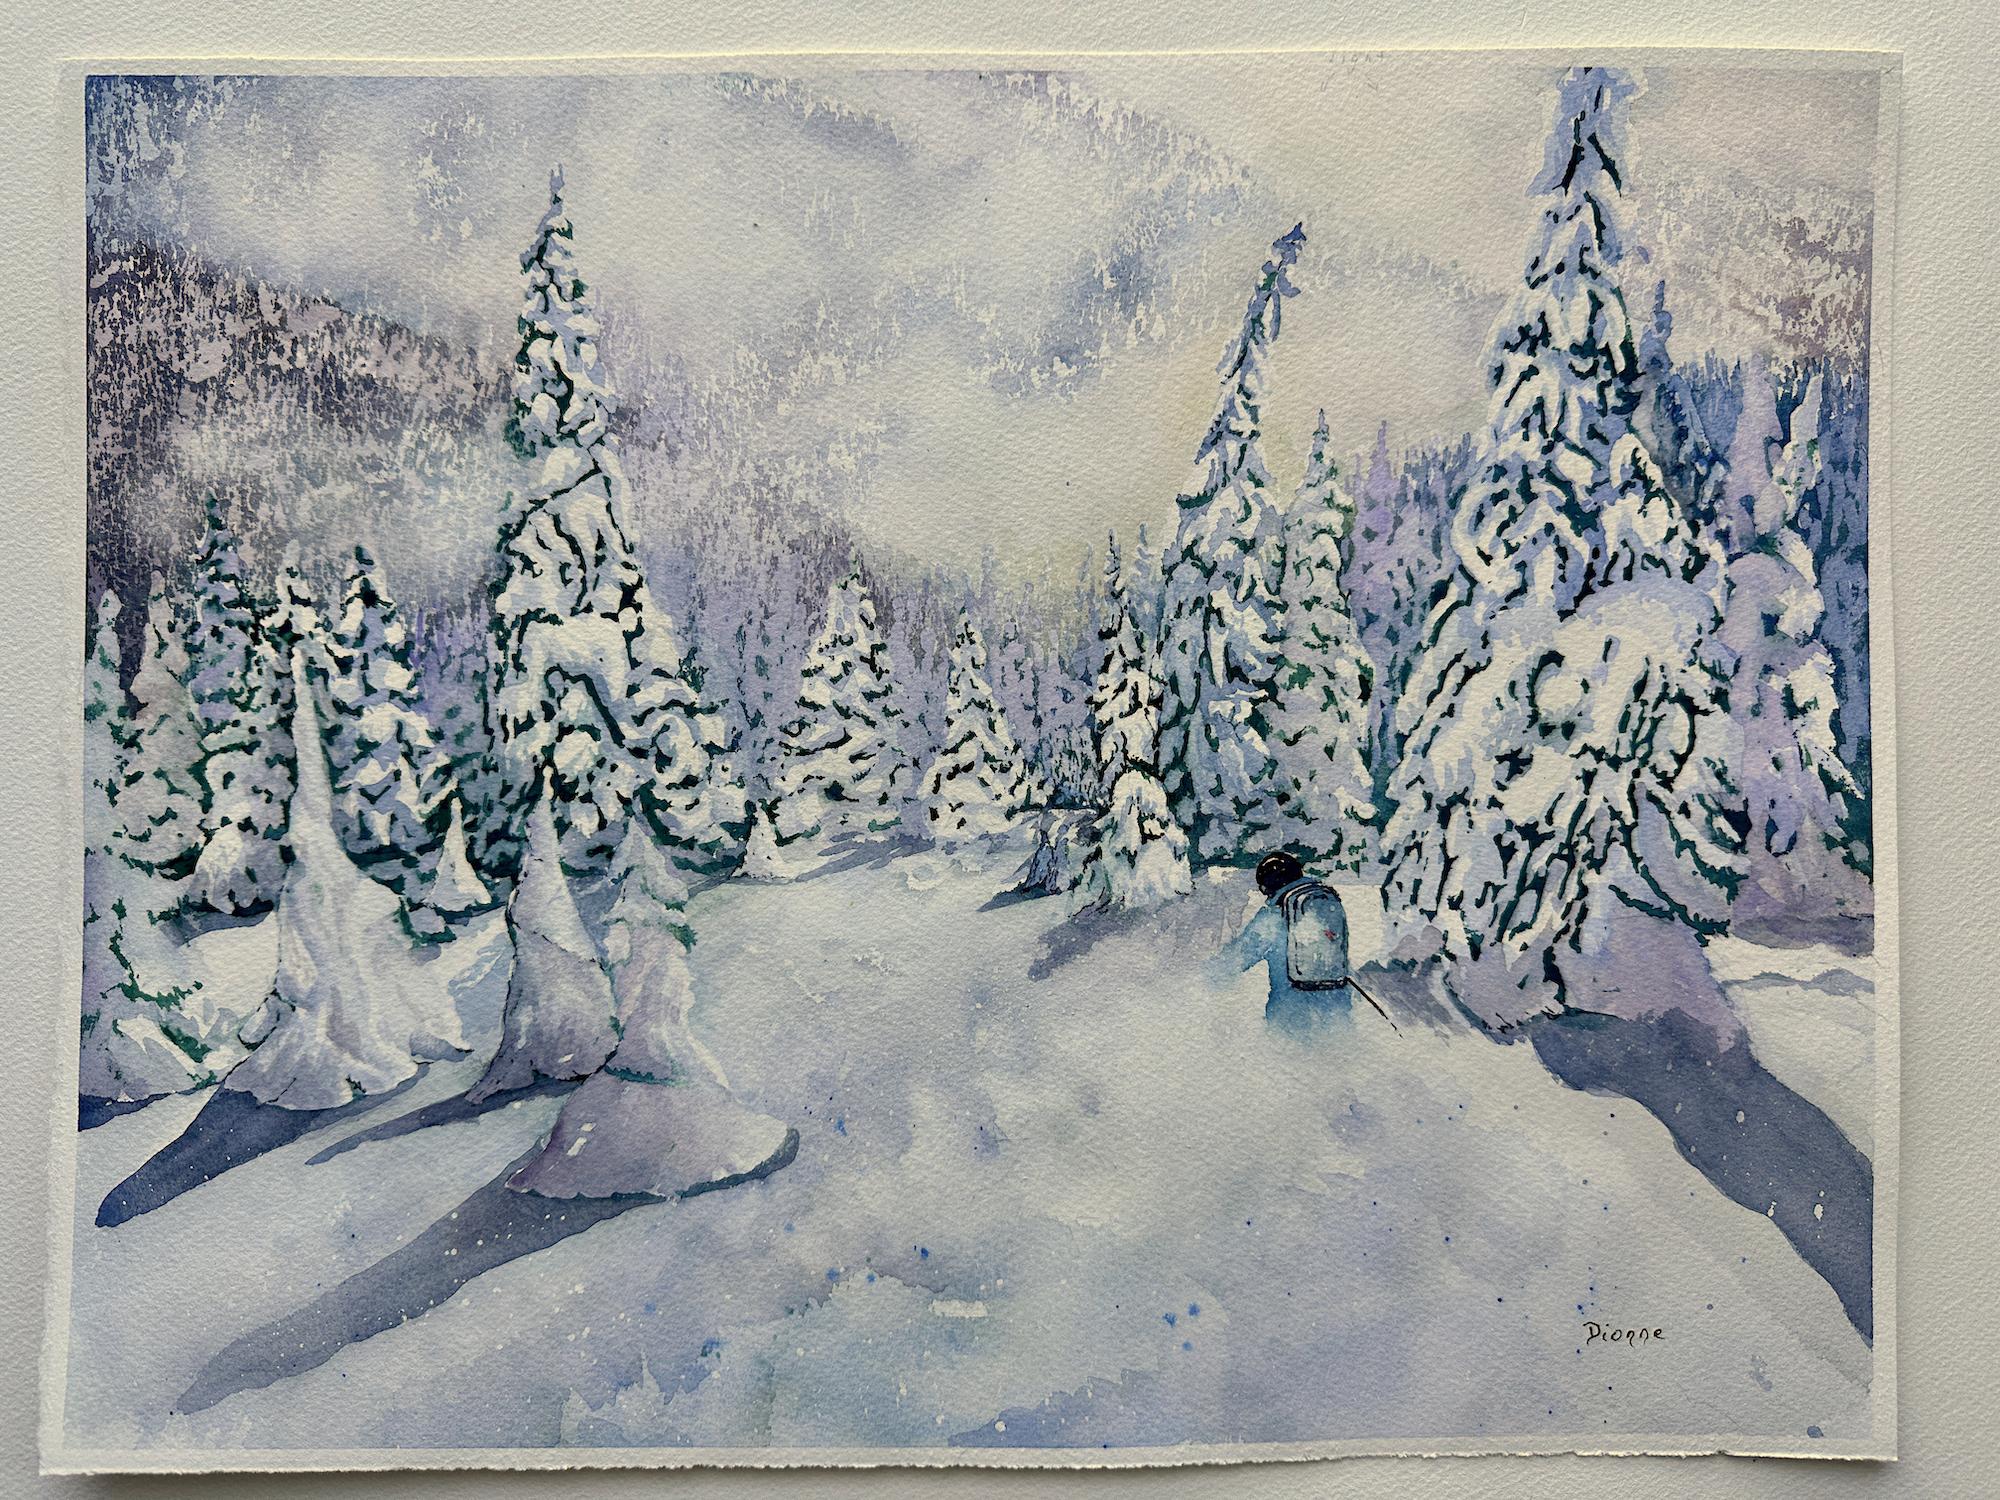 First Tracks, Original Painting - Impressionist Art by Maurice Dionne